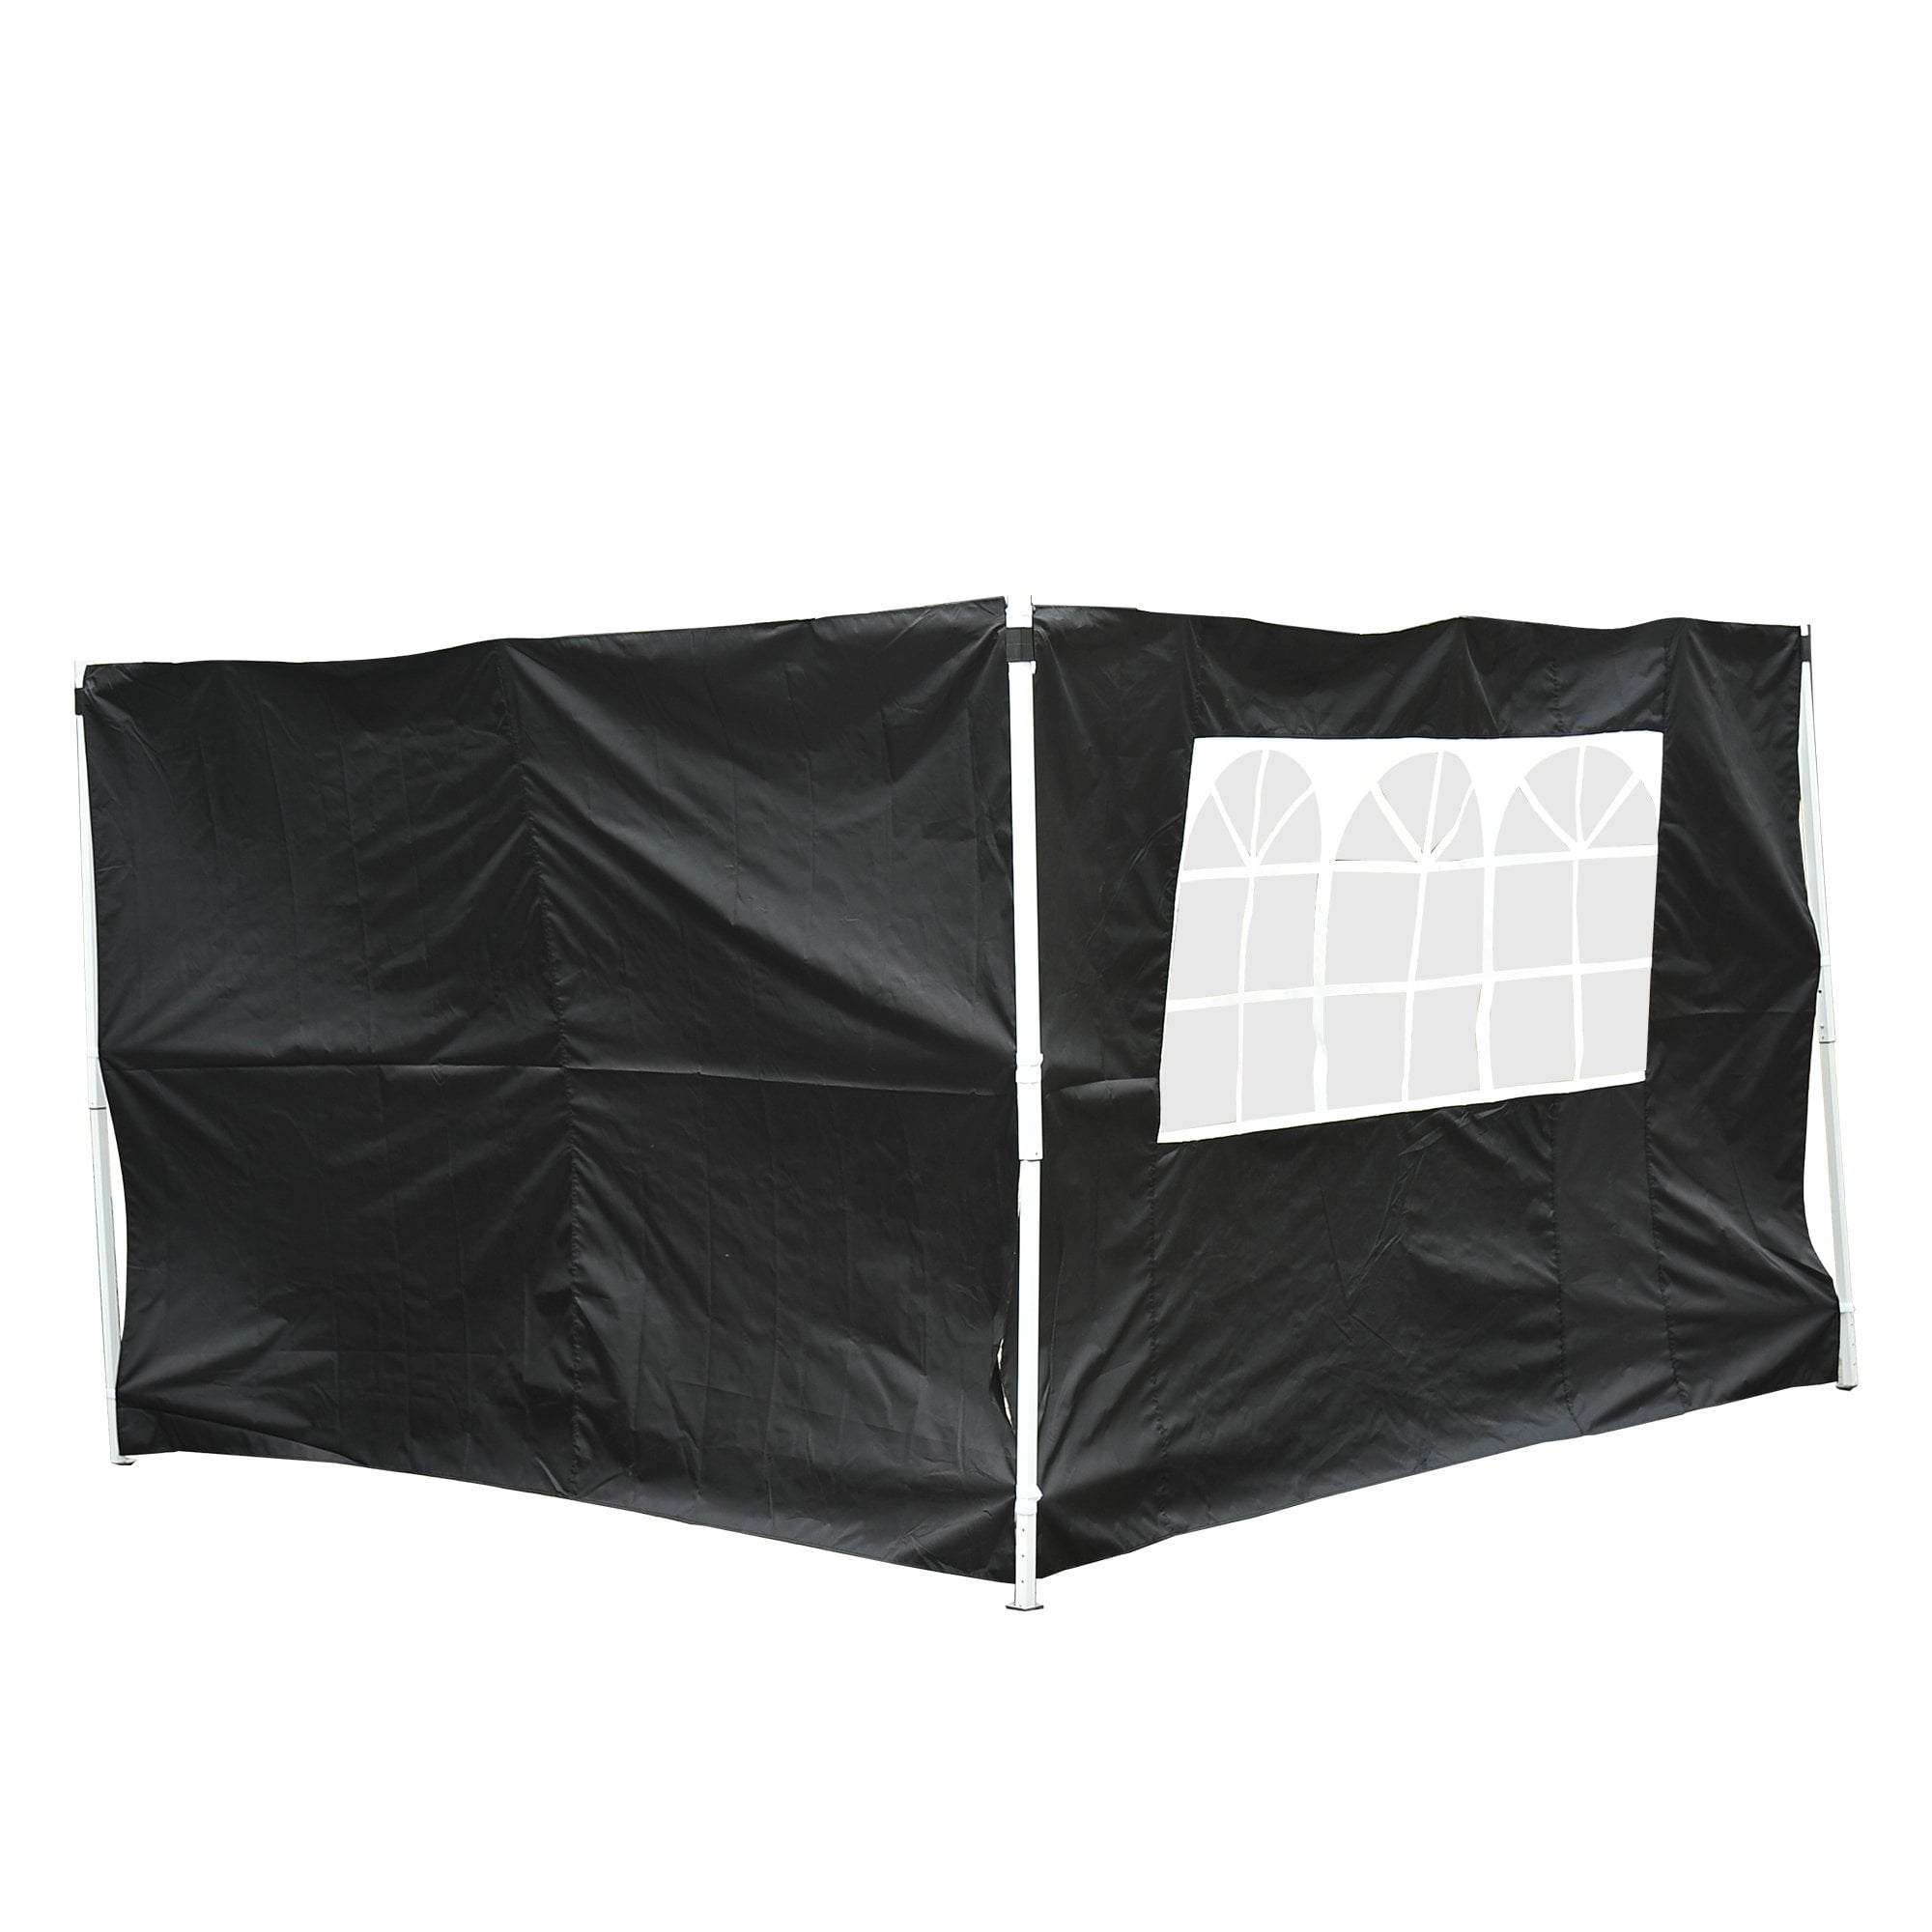 Oasis 3m x 2m Gazebo Replacement Side Panels - Black - Oasis Outdoor  | TJ Hughes